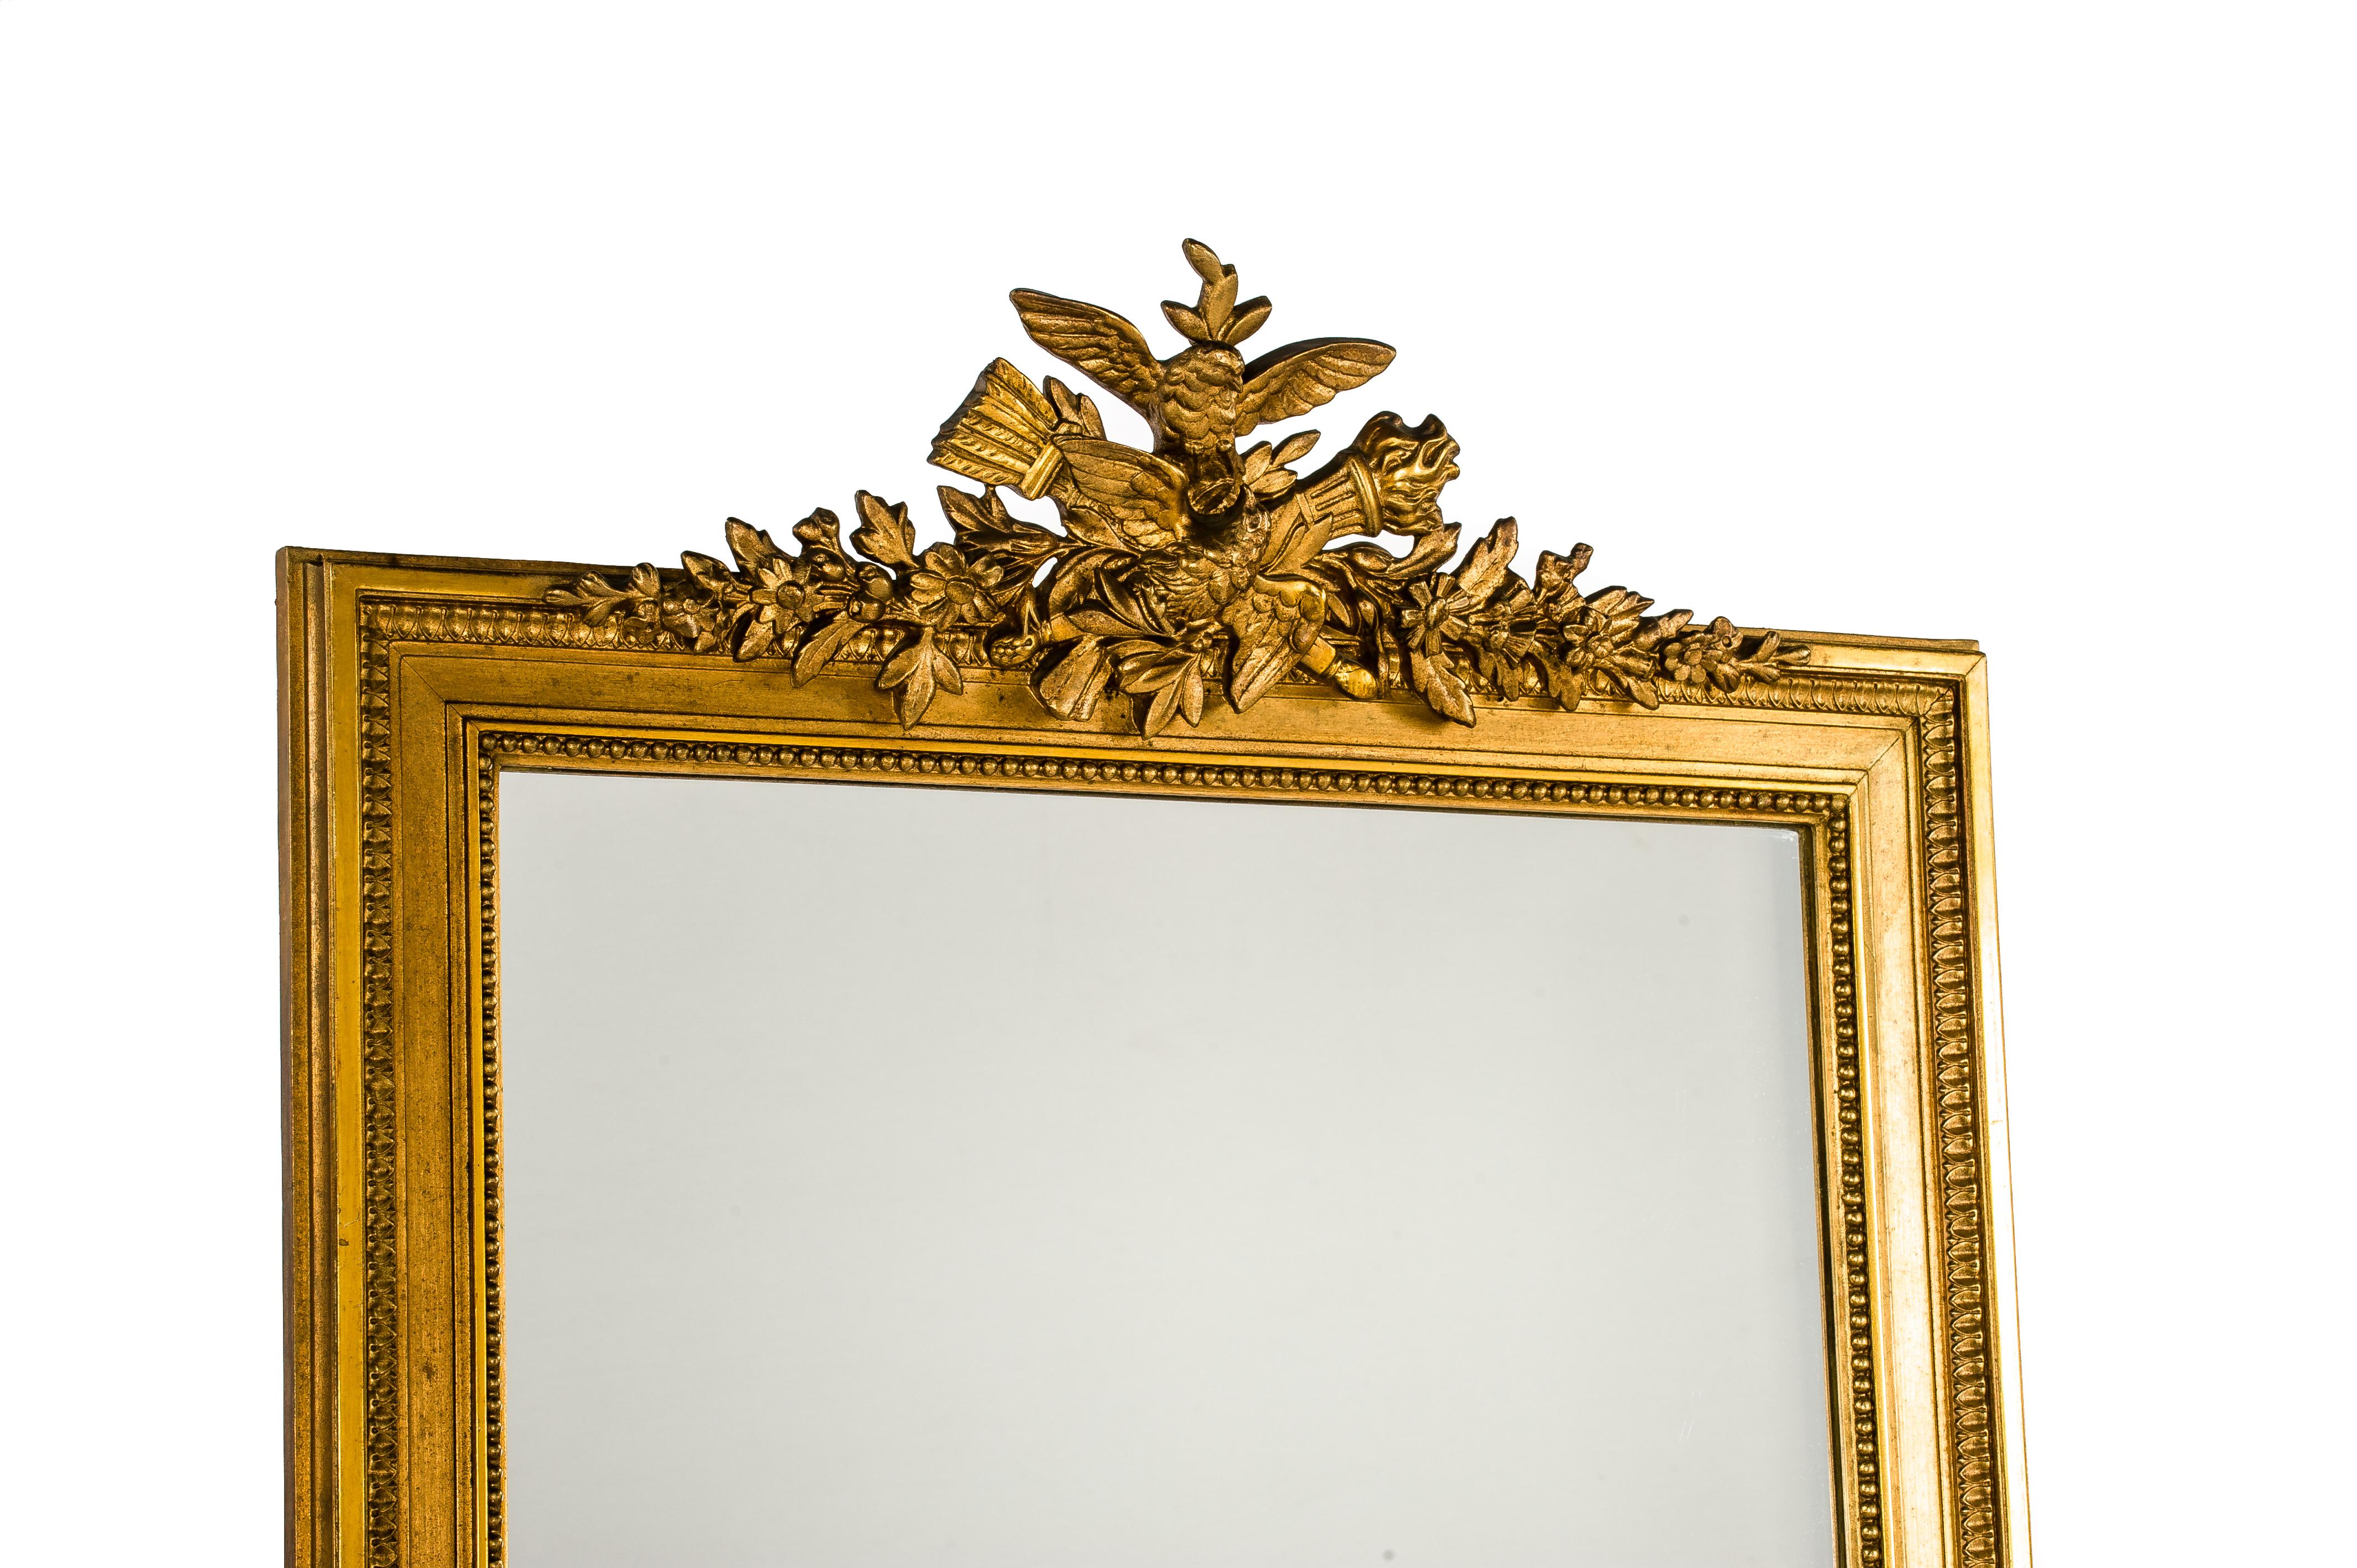 A very handsome and tall pier mirror that was made in the late 19th century in Northern France. 
Its square frame, stylized laurel, and crest are typical for the Louis Seize style. The elaborate crest features a central crossed torch and arrow with